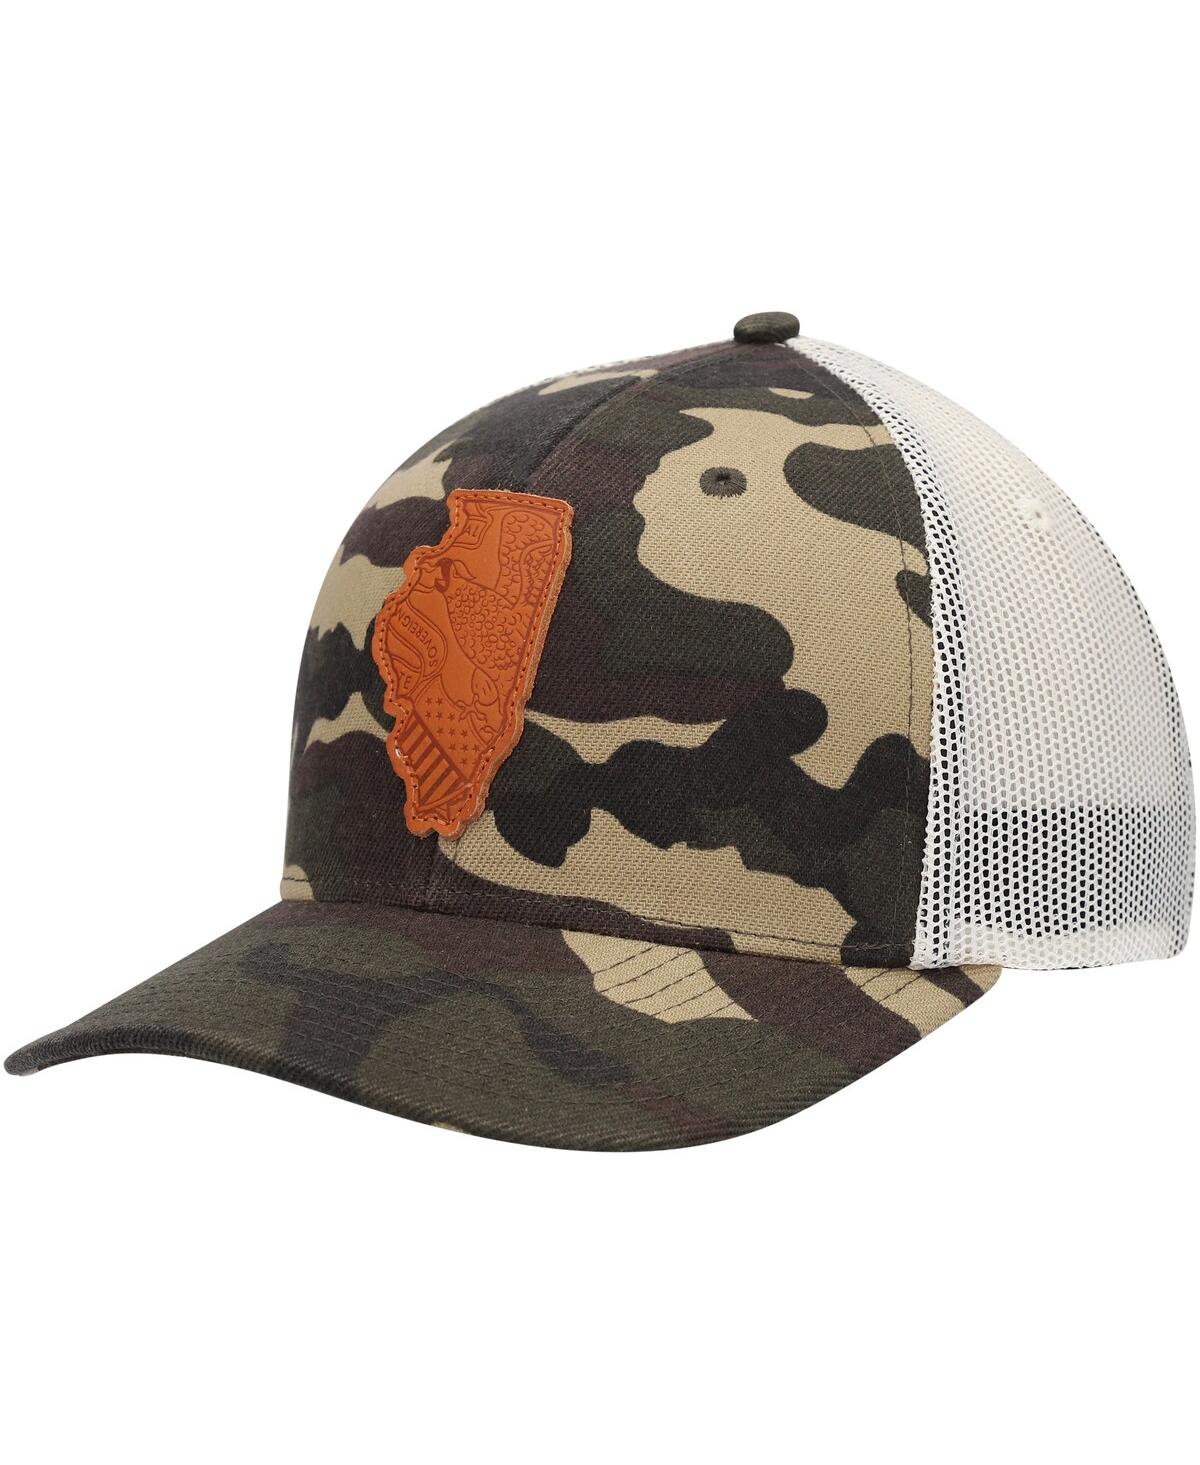 Men's Local Crowns Camo Illinois Icon Woodland State Patch Trucker Snapback Hat - Camo